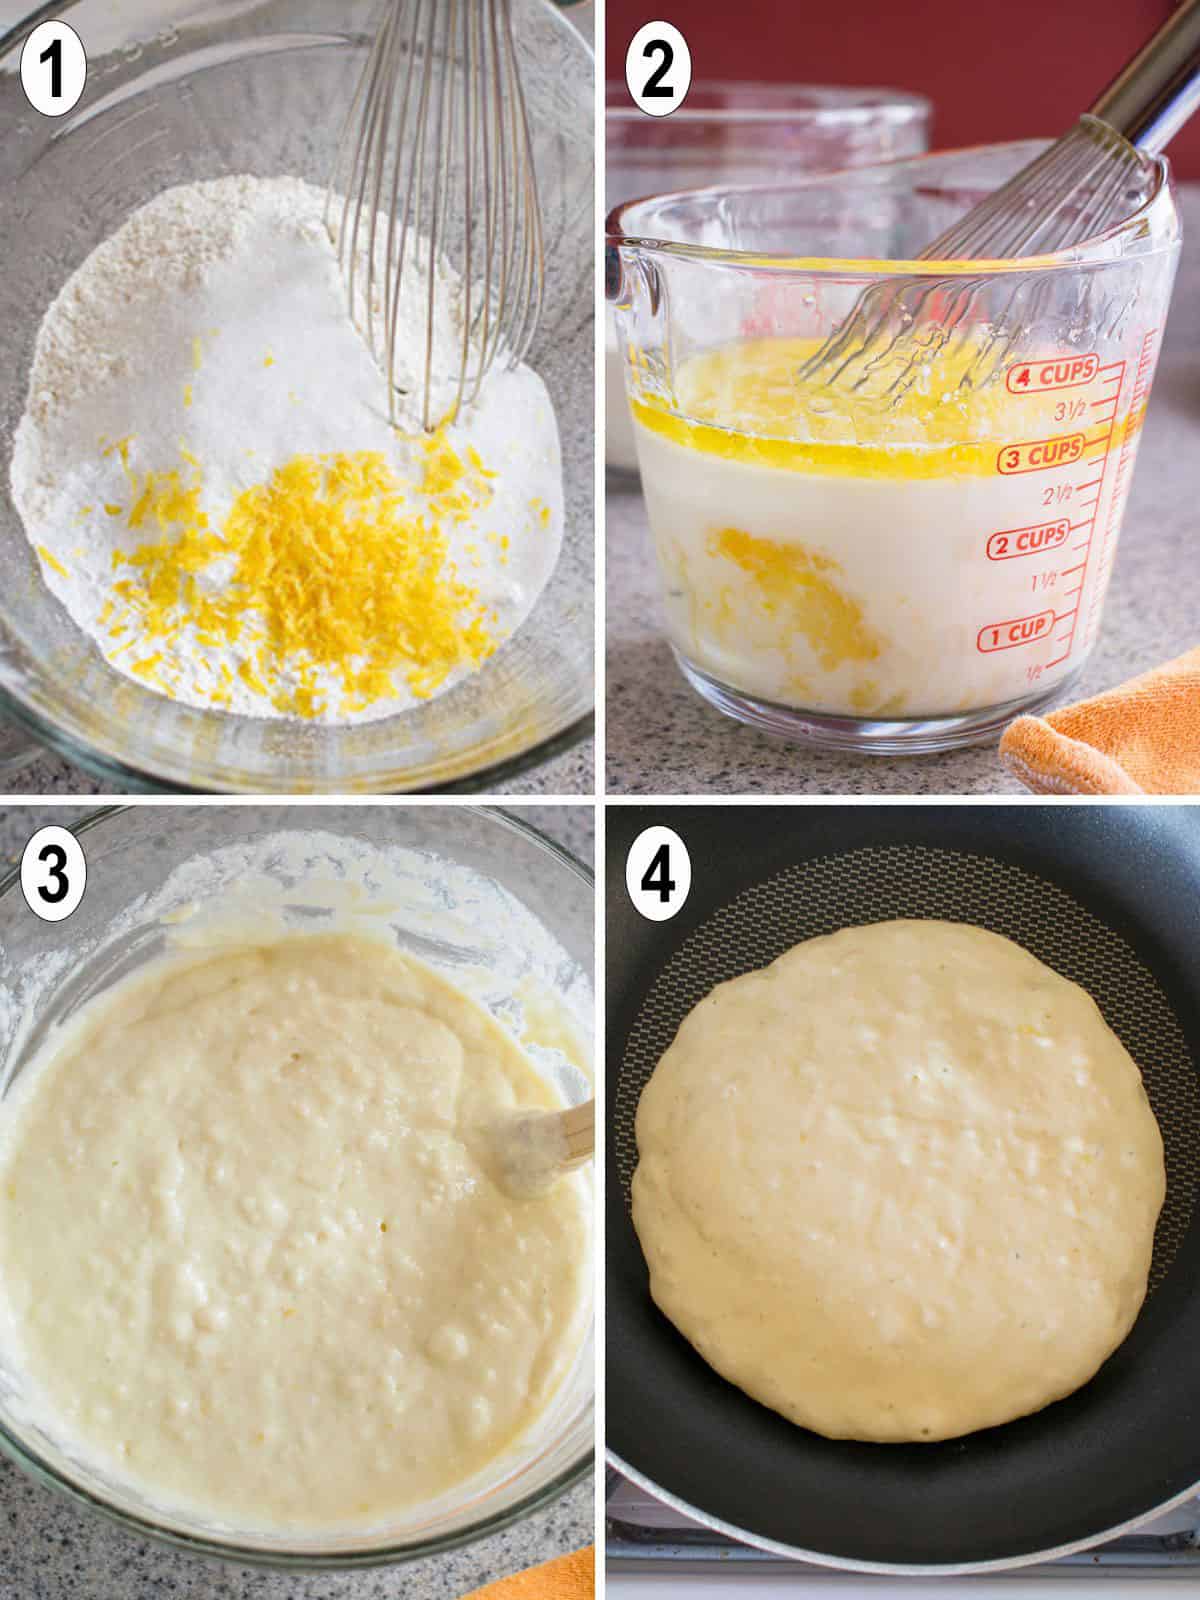 dry ingredients mixed with wet to form batter. pancake in pan